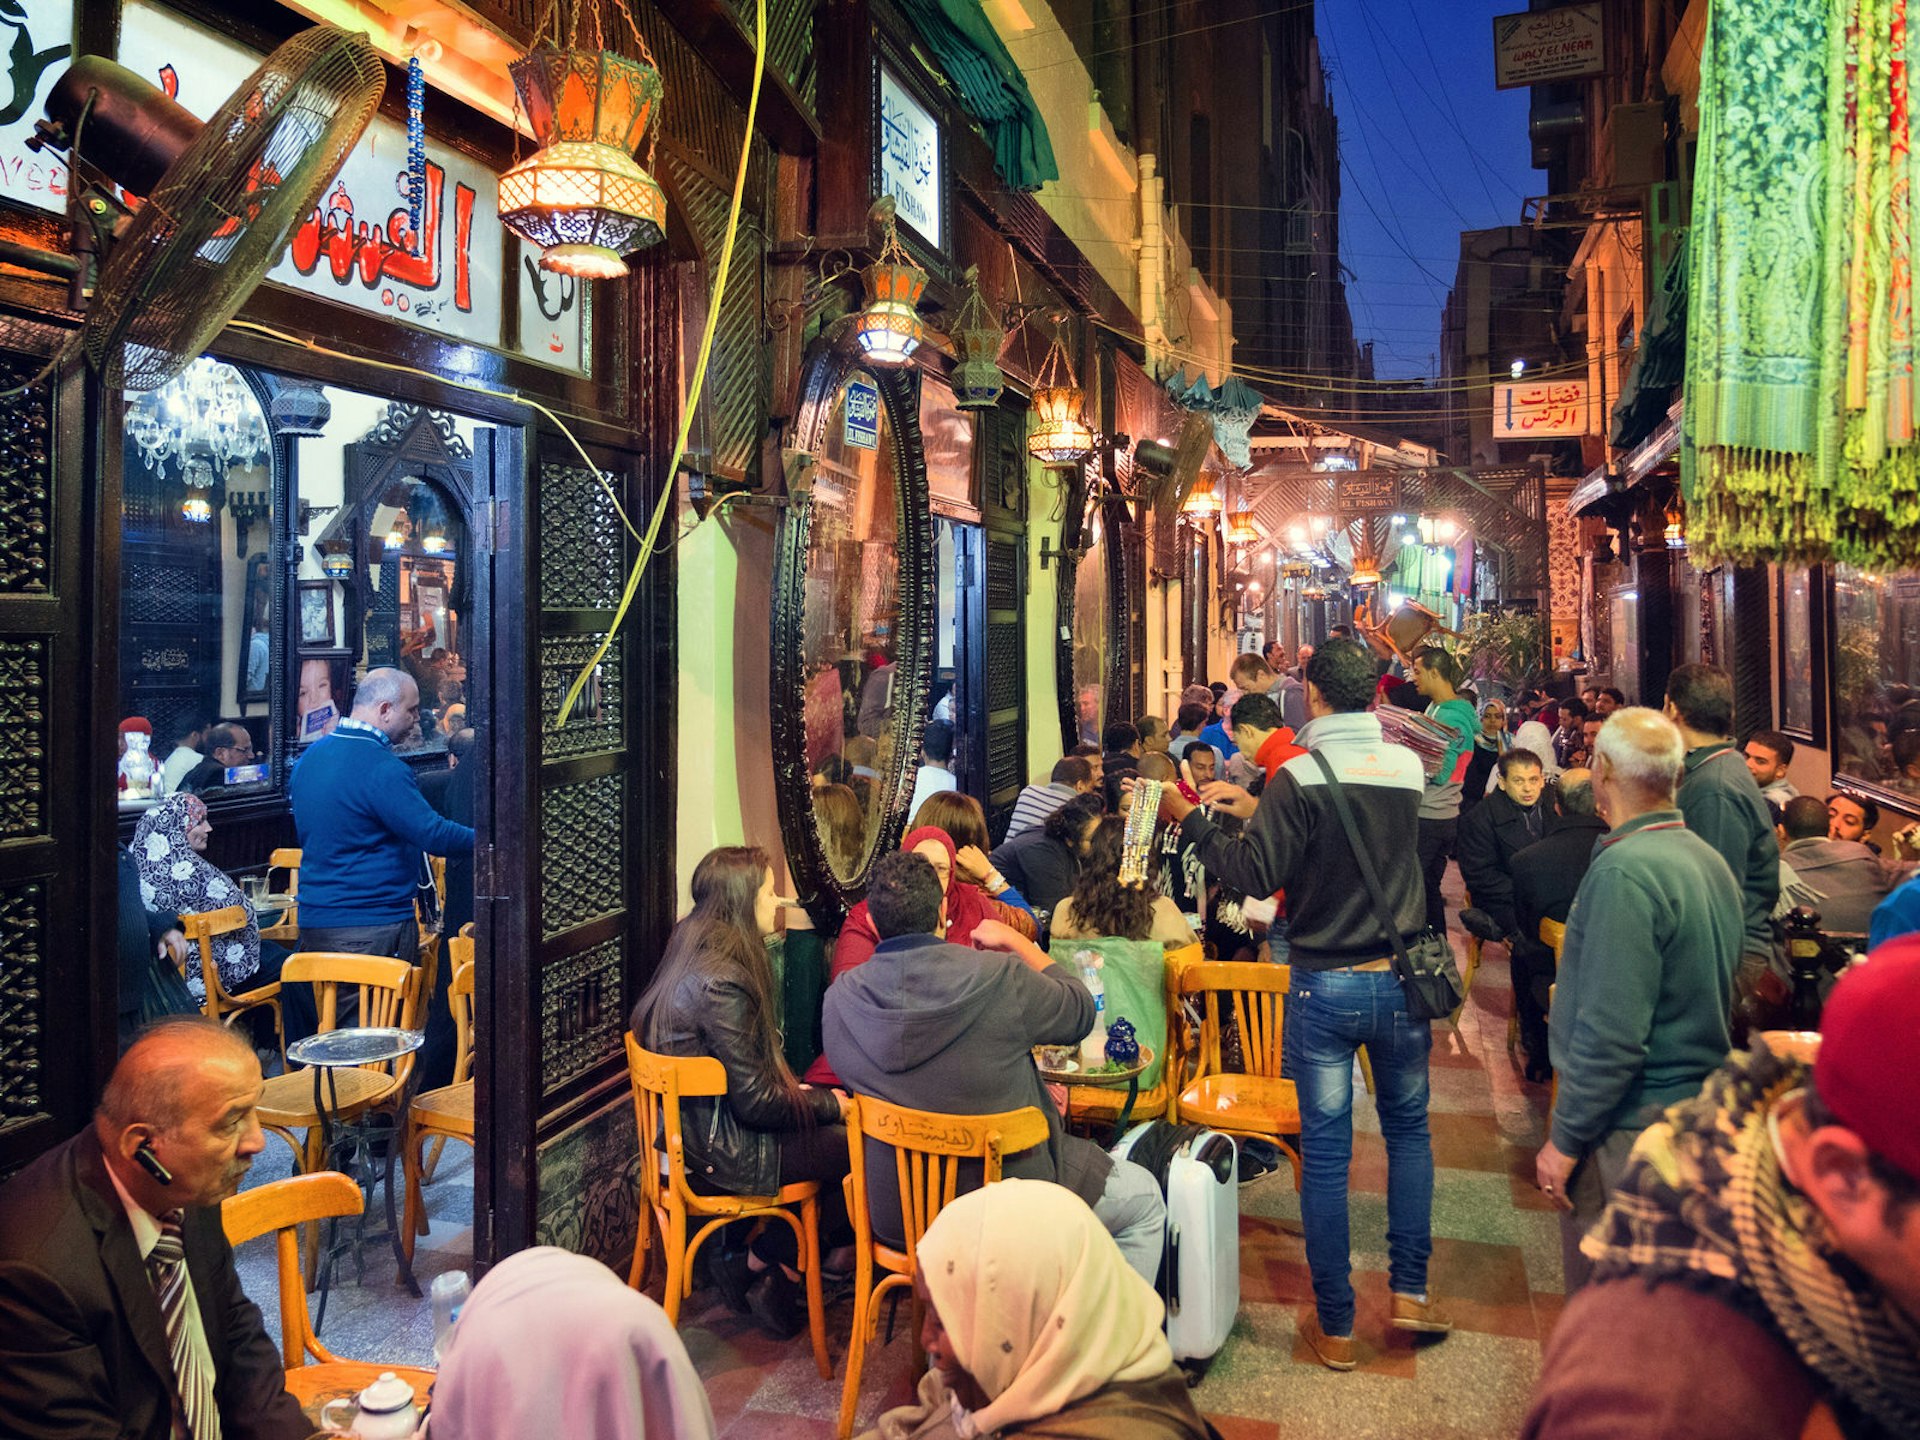 Cafe in Cairo, Egypt. Image by Emad Aljumah / Getty Images